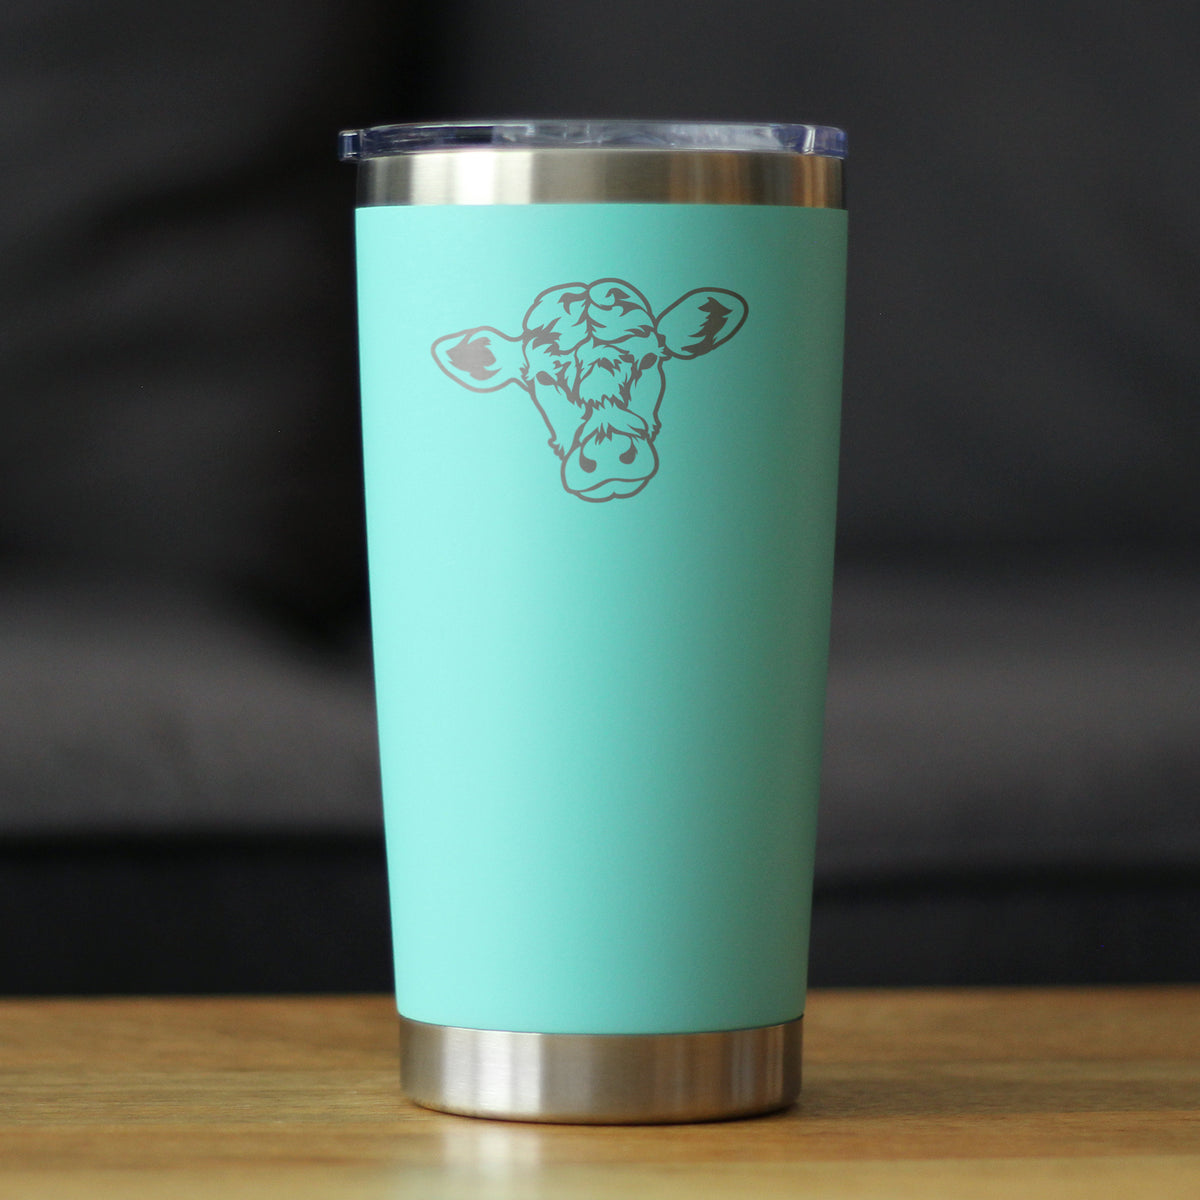 Cow Face - Insulated Coffee Tumbler Cup with Sliding Lid - Stainless Steel Travel Mug - Cow Gift for Women and Men